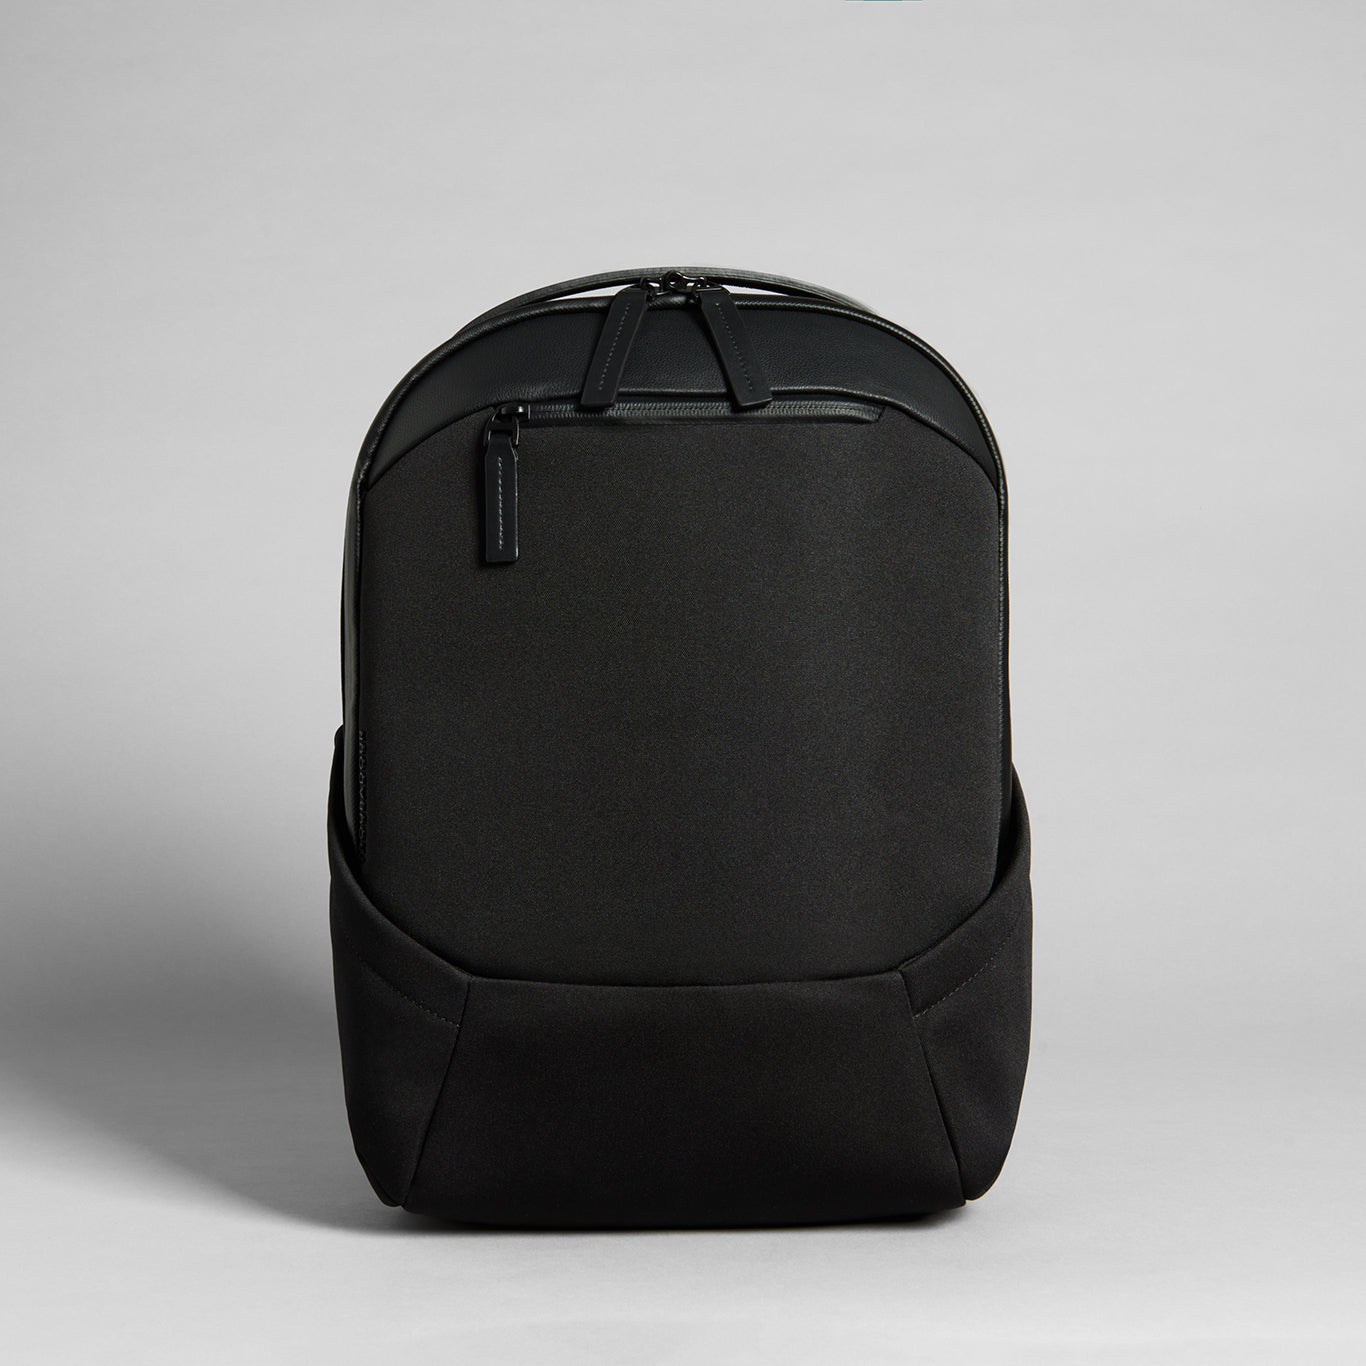 Apex Compact Backpack 3.0